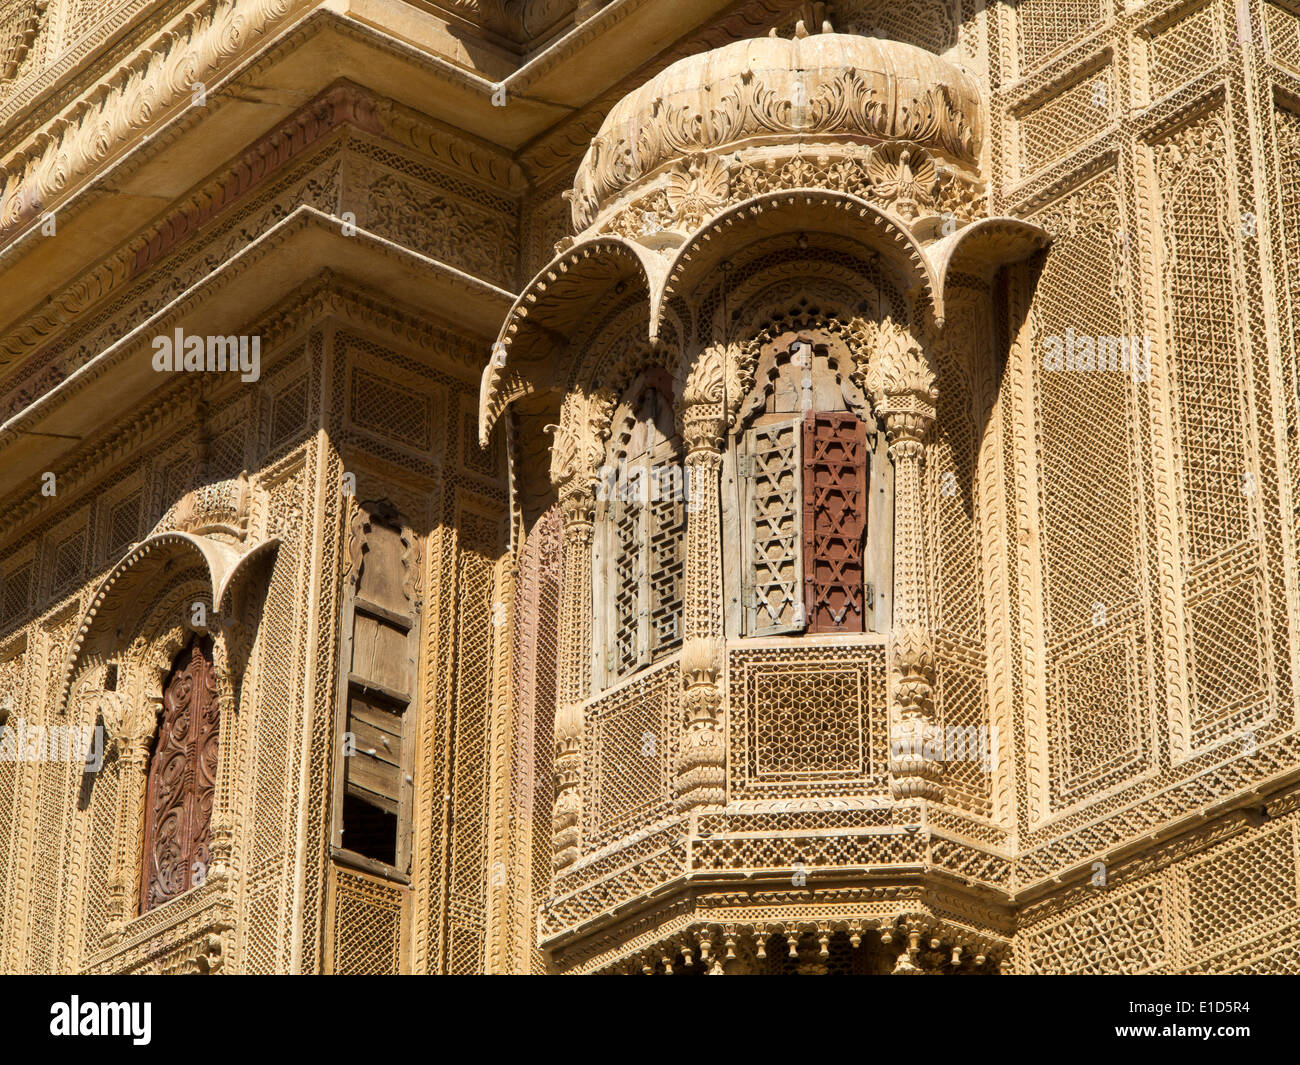 India, Rajasthan, Jaisalmer, Patwon Ki Haveli, carved sandstone projecting window balcony with wooden shutters Stock Photo